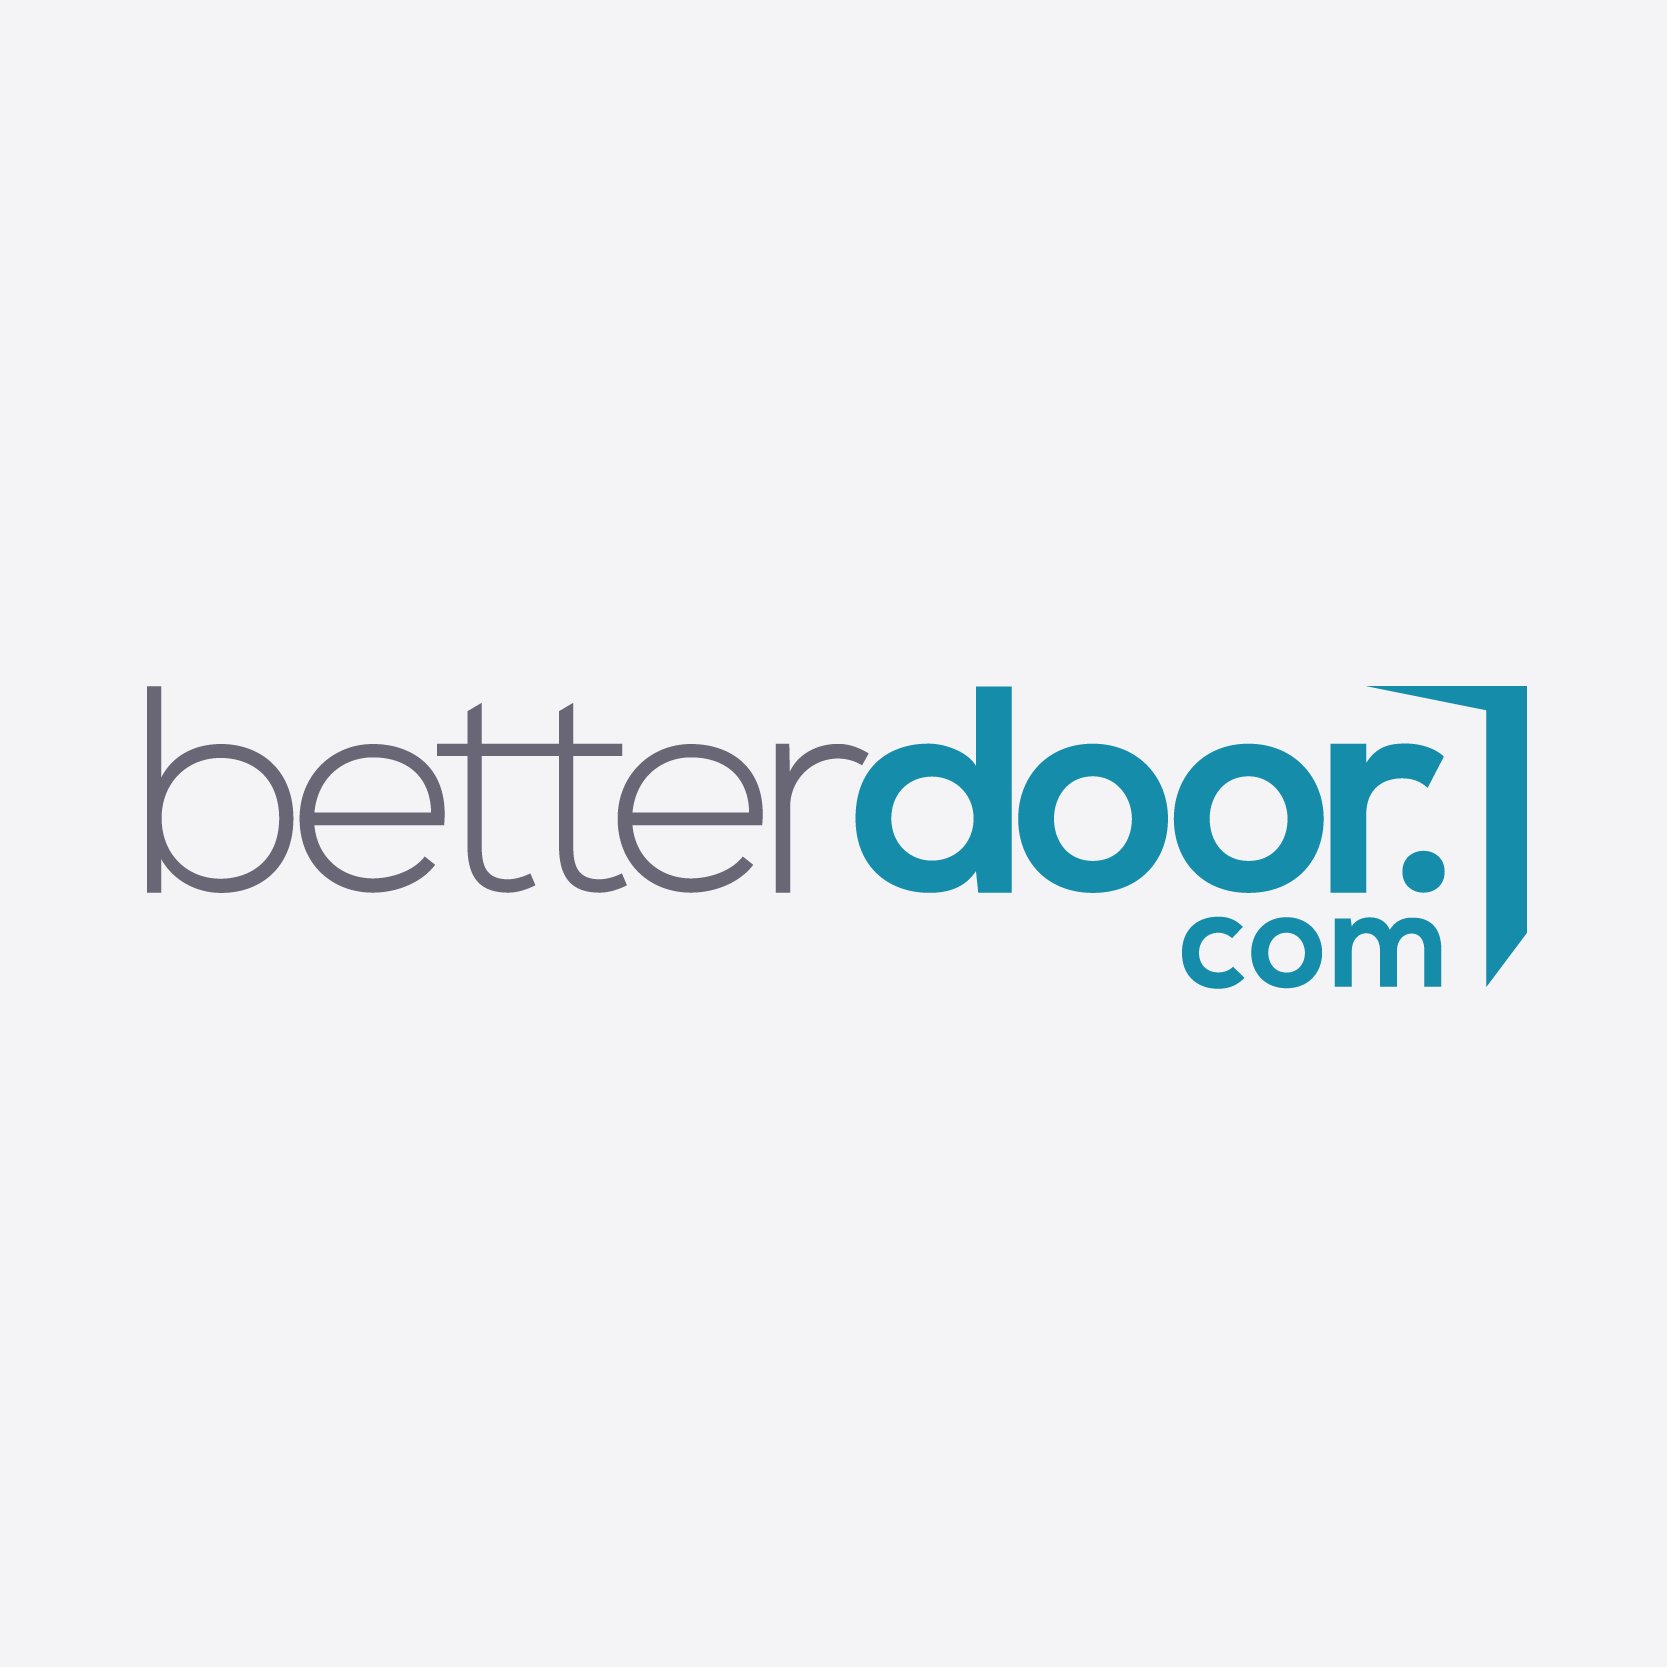 The one-stop shop for everything you need to make your door better!